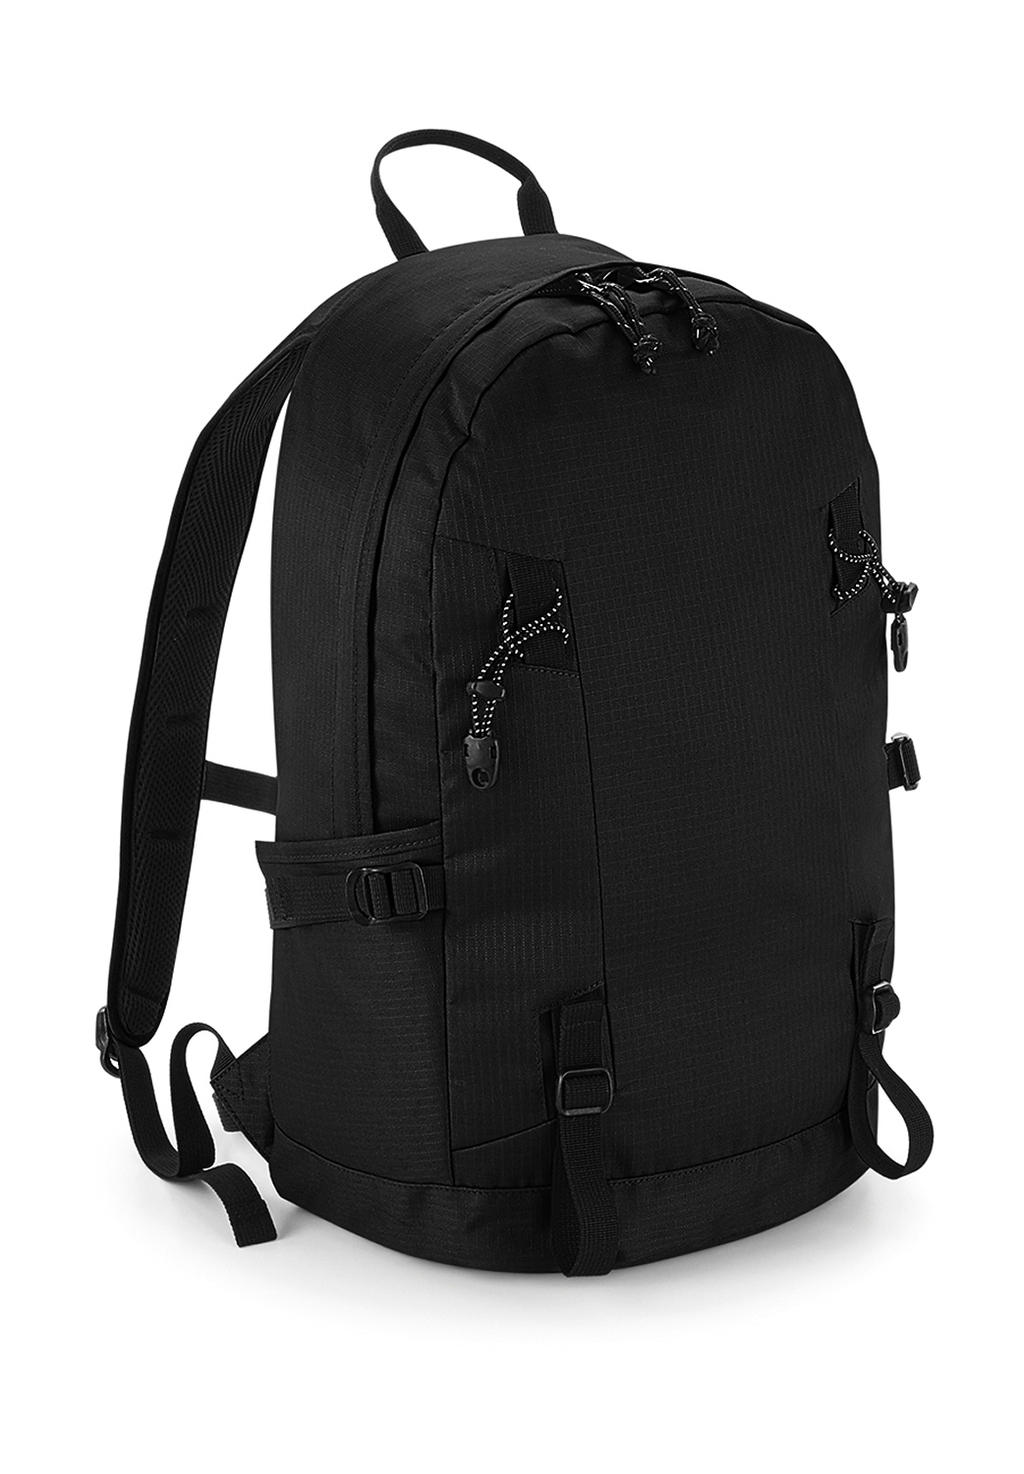  Everyday Outdoor 20L Backpack in Farbe Black